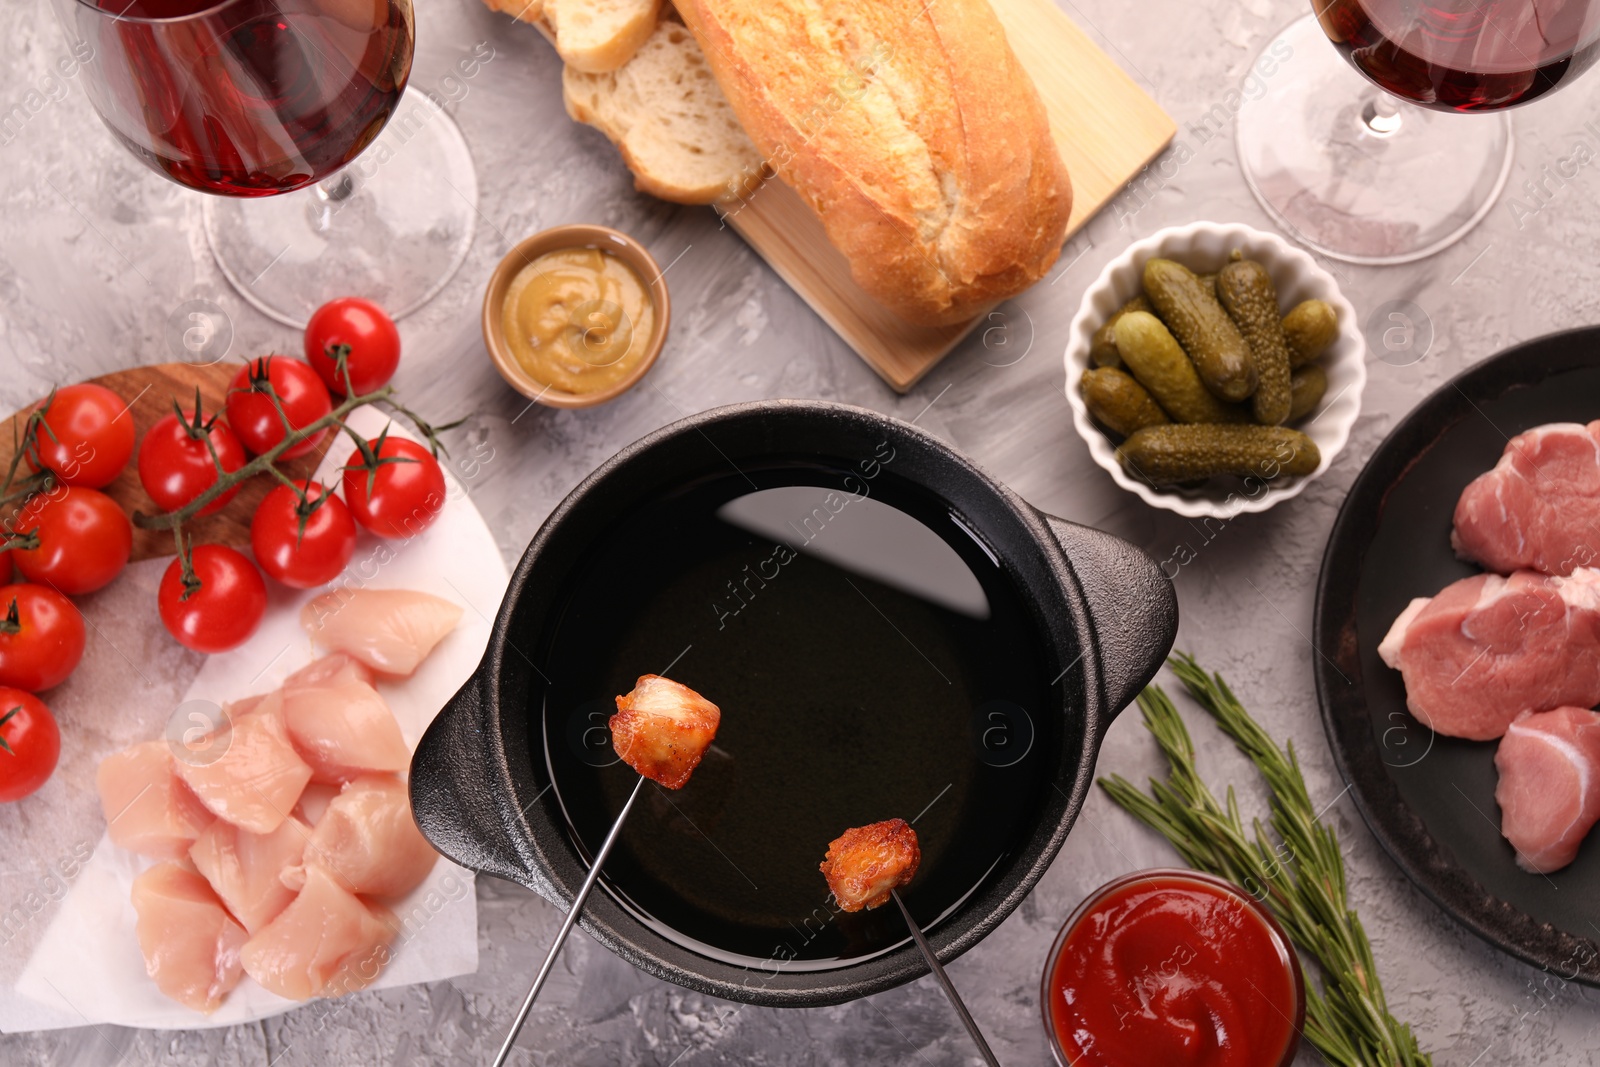 Photo of Fondue pot, forks with fried meat pieces, glasses of red wine and other products on grey textured table, flat lay